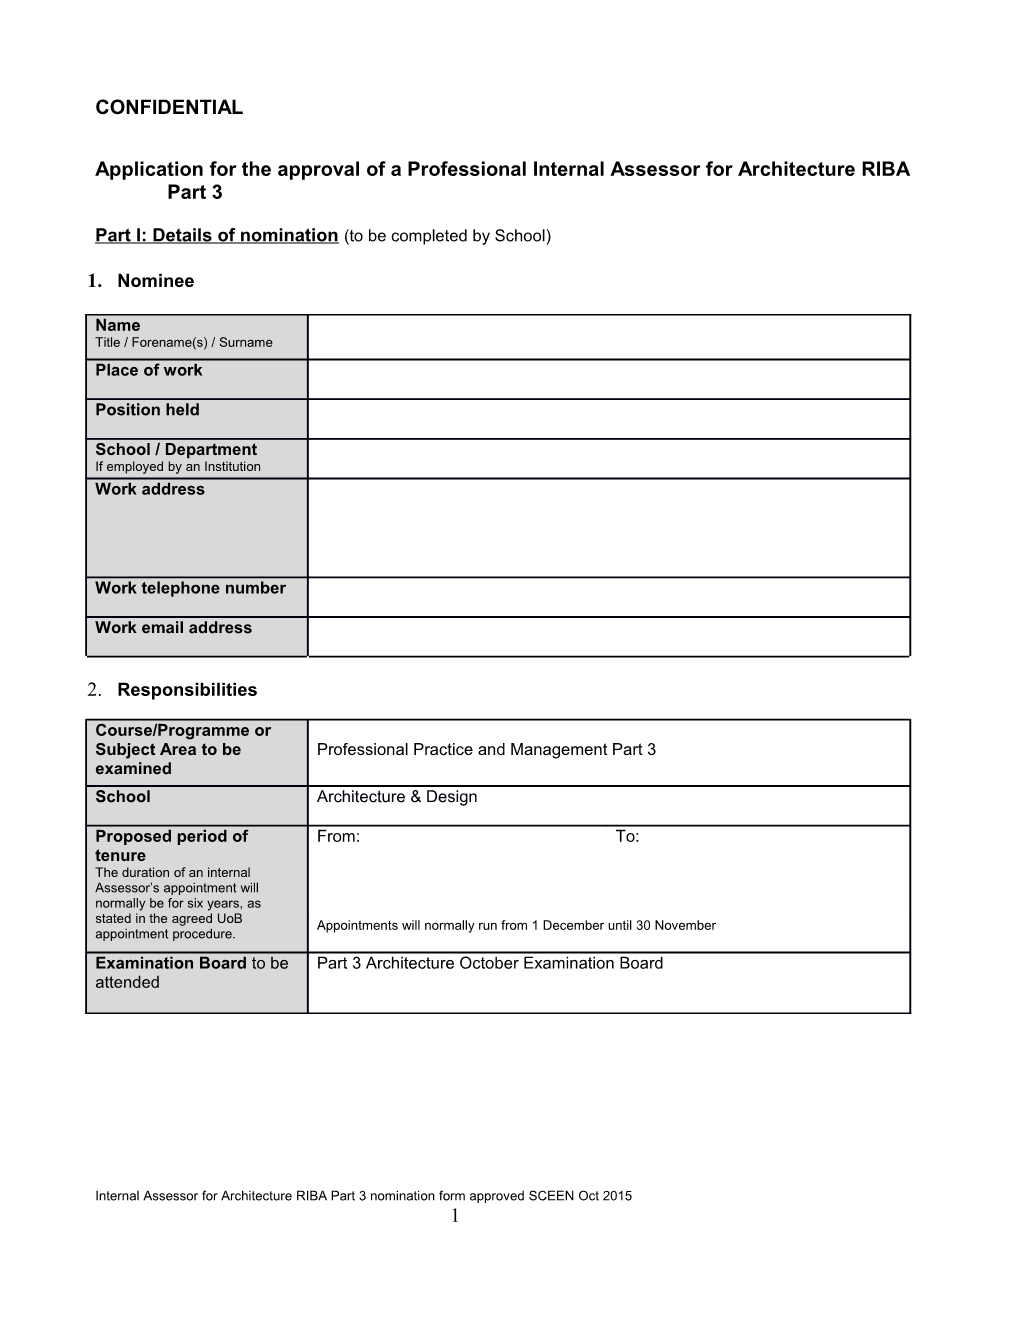 Application for the Approval of a Professional Internal Assessor for Architecture RIBA Part 3